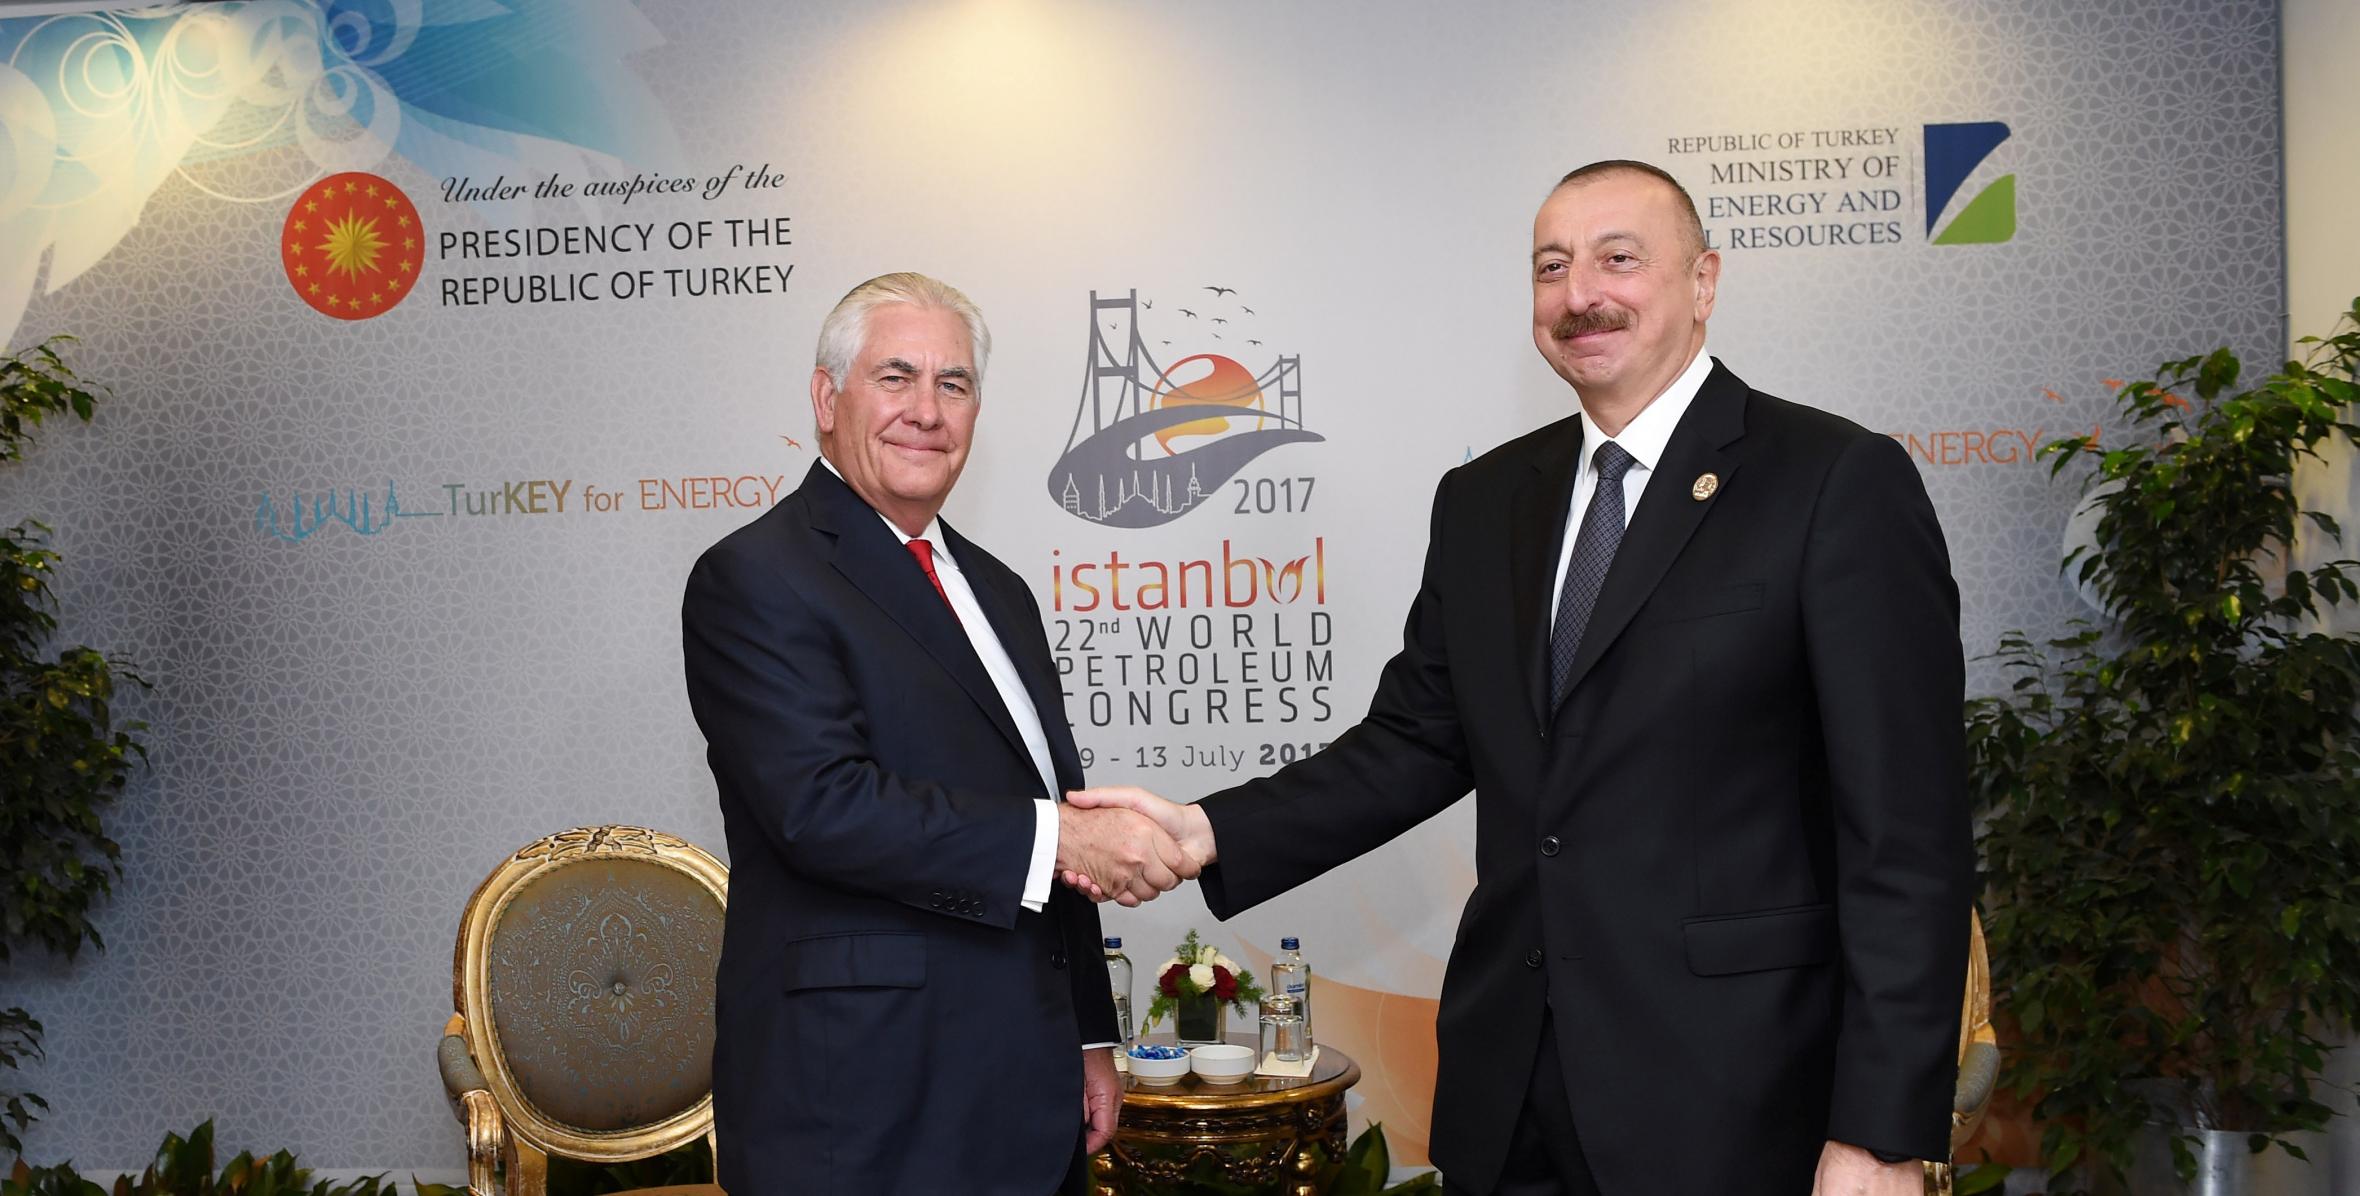 Ilham Aliyev met with US Secretary of State in Istanbul